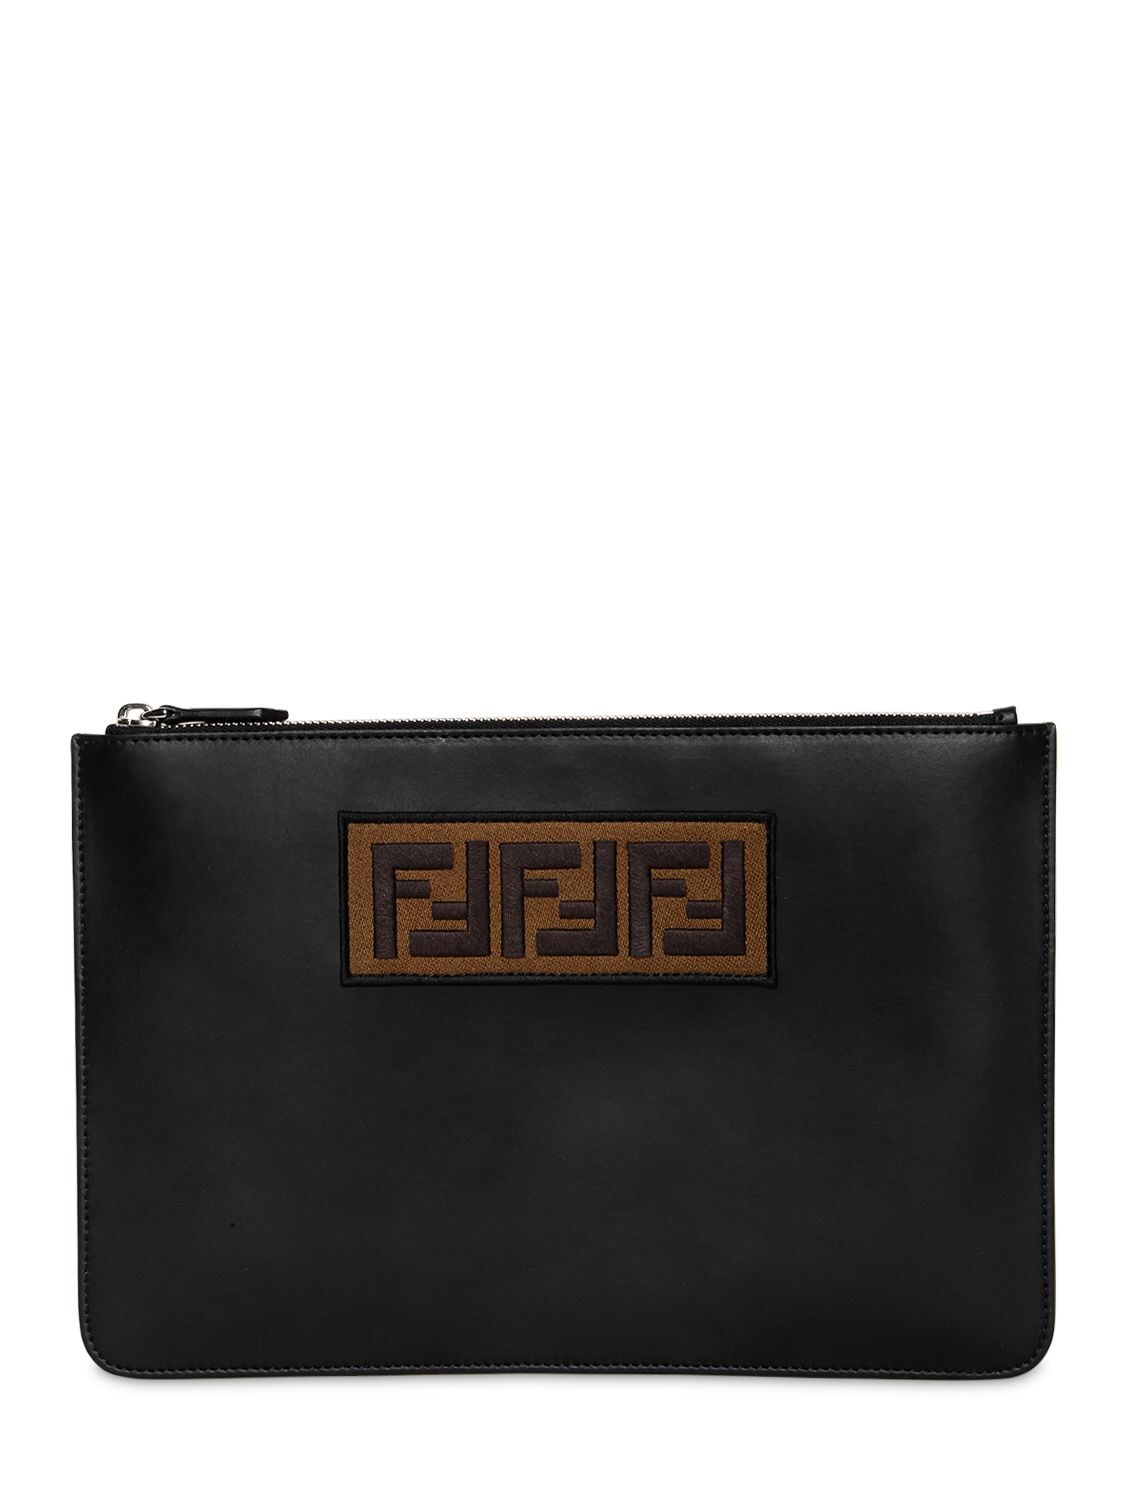 FENDI FF EMBROIDERED LEATHER POUCH,68IDNU056-RJE0N0S1